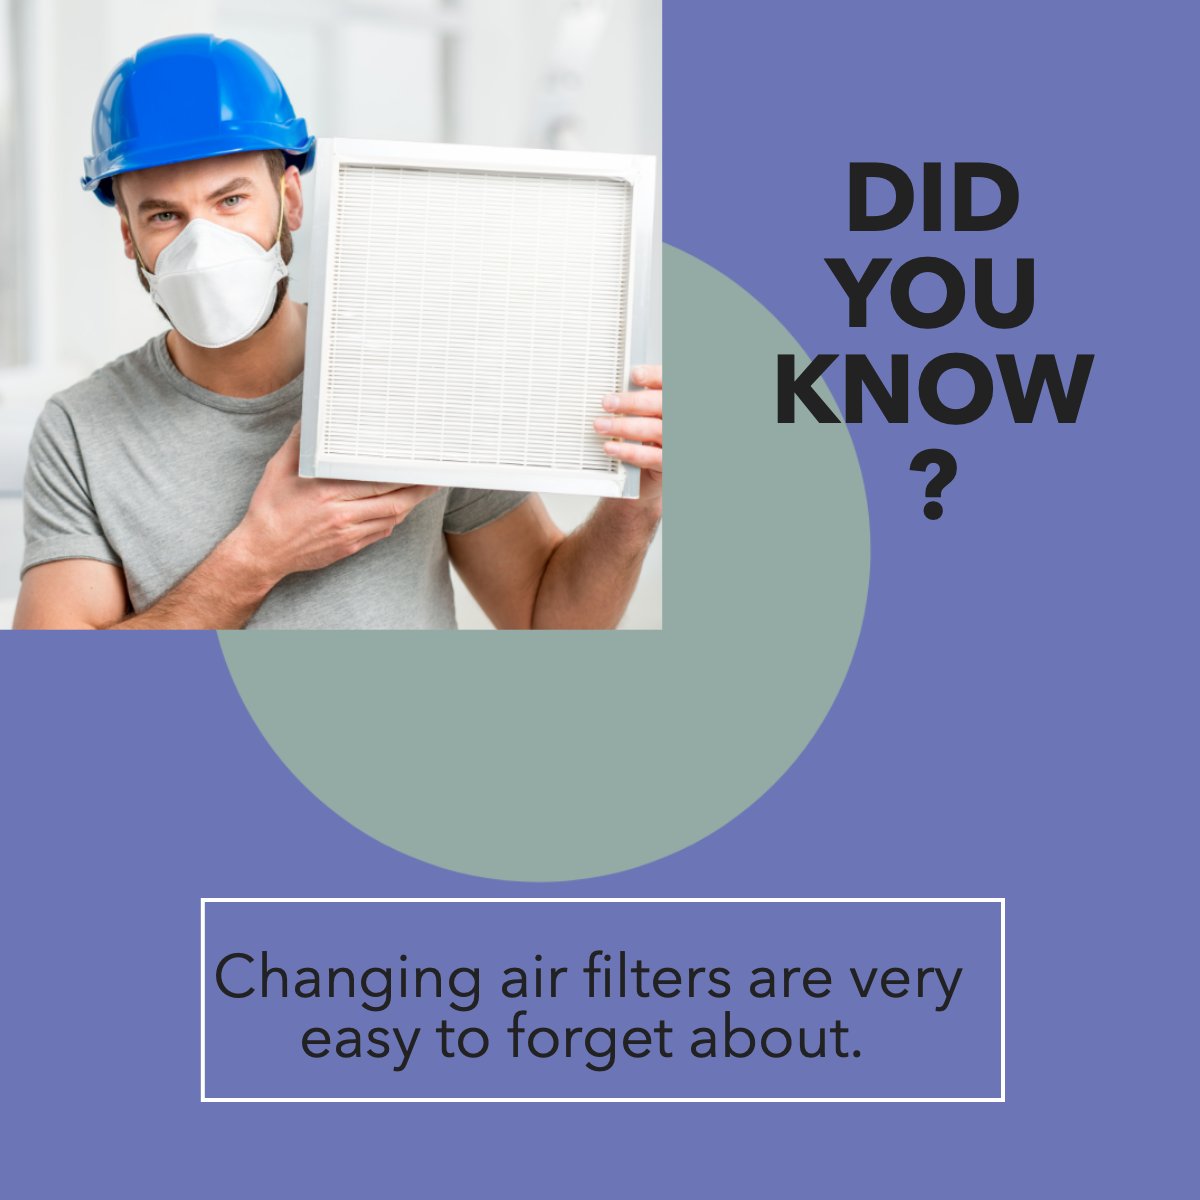 The longest you should go without changing your air filter is the recommended 90 days. 

Did you know this? 🤔

#airfilter #cleanairfilter #airquality
 #lasvegasrealtor #lasvegasrealestate #sparrowsells #lasvegashomes #realestate #vegasbaby #realtorlife #speaknsparrow